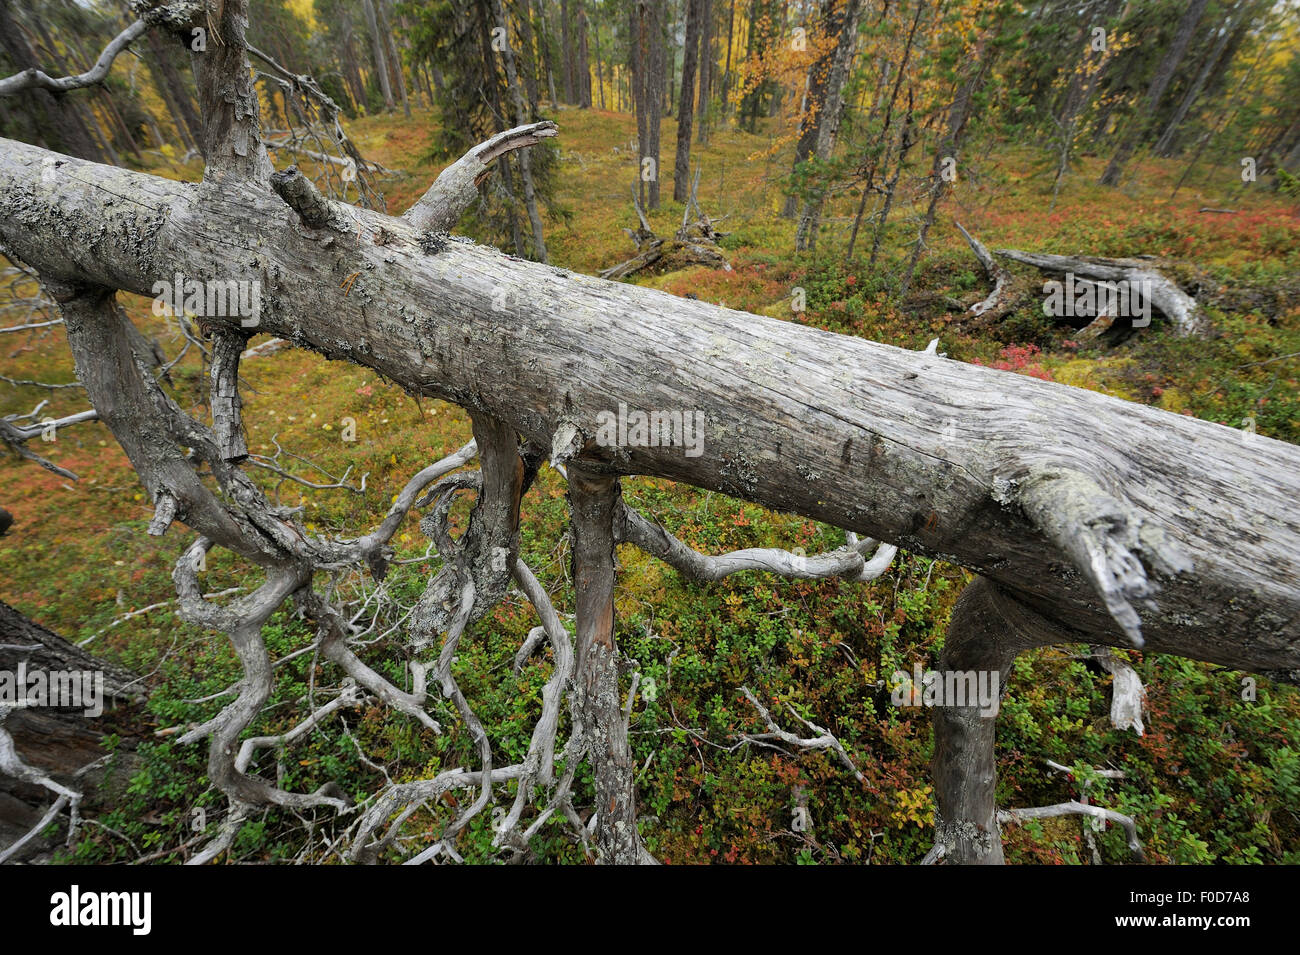 Old-growth, taiga forest in Oulanka National Park, Finland, September 2008  Stock Photo - Alamy